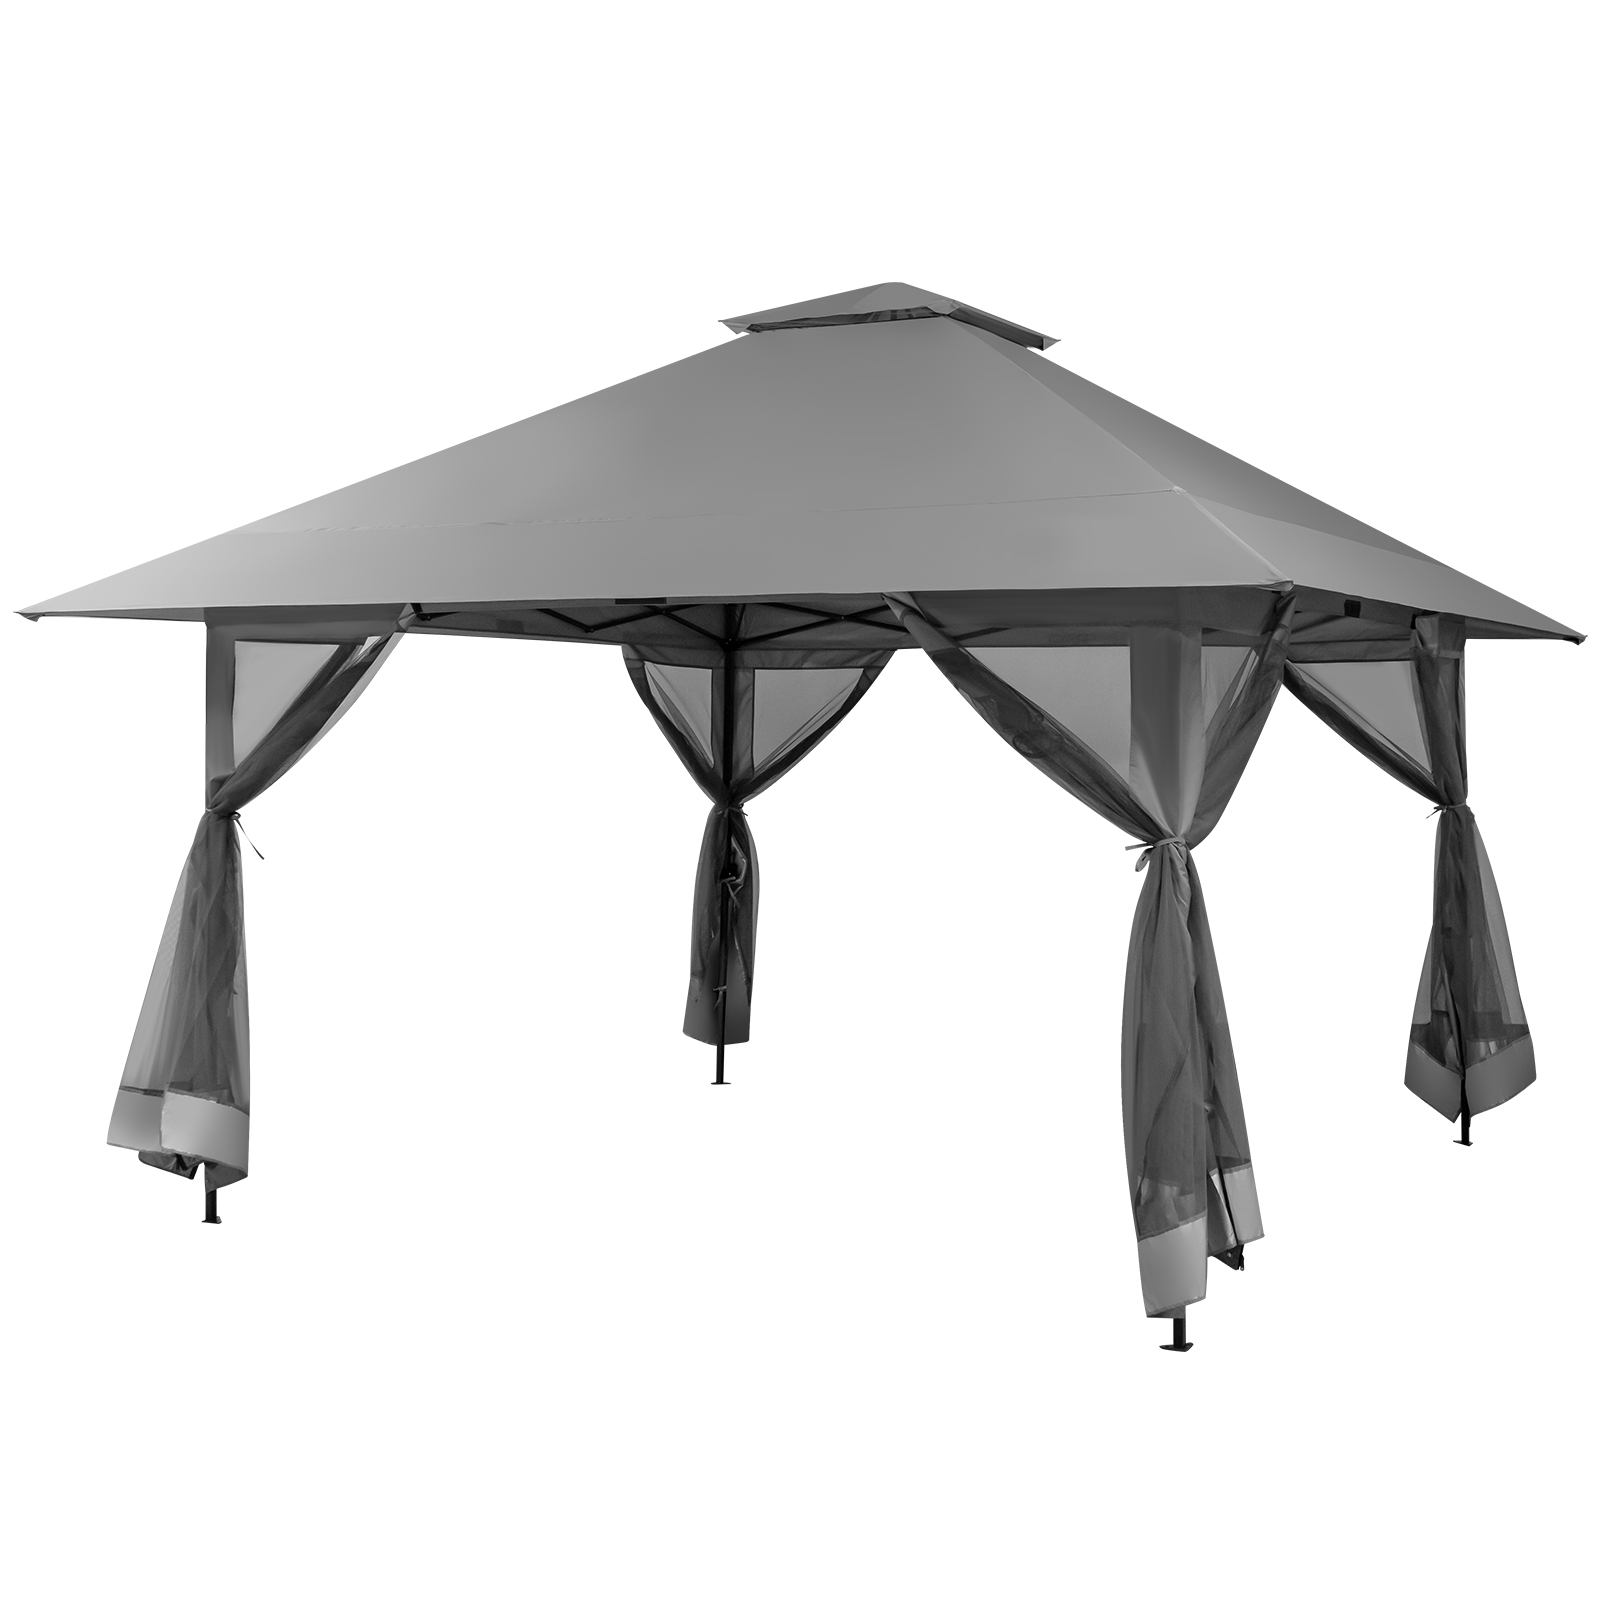 4 x 4m Pop-up Gazebo with Mesh Sidewalls and Adjustable Height-Grey